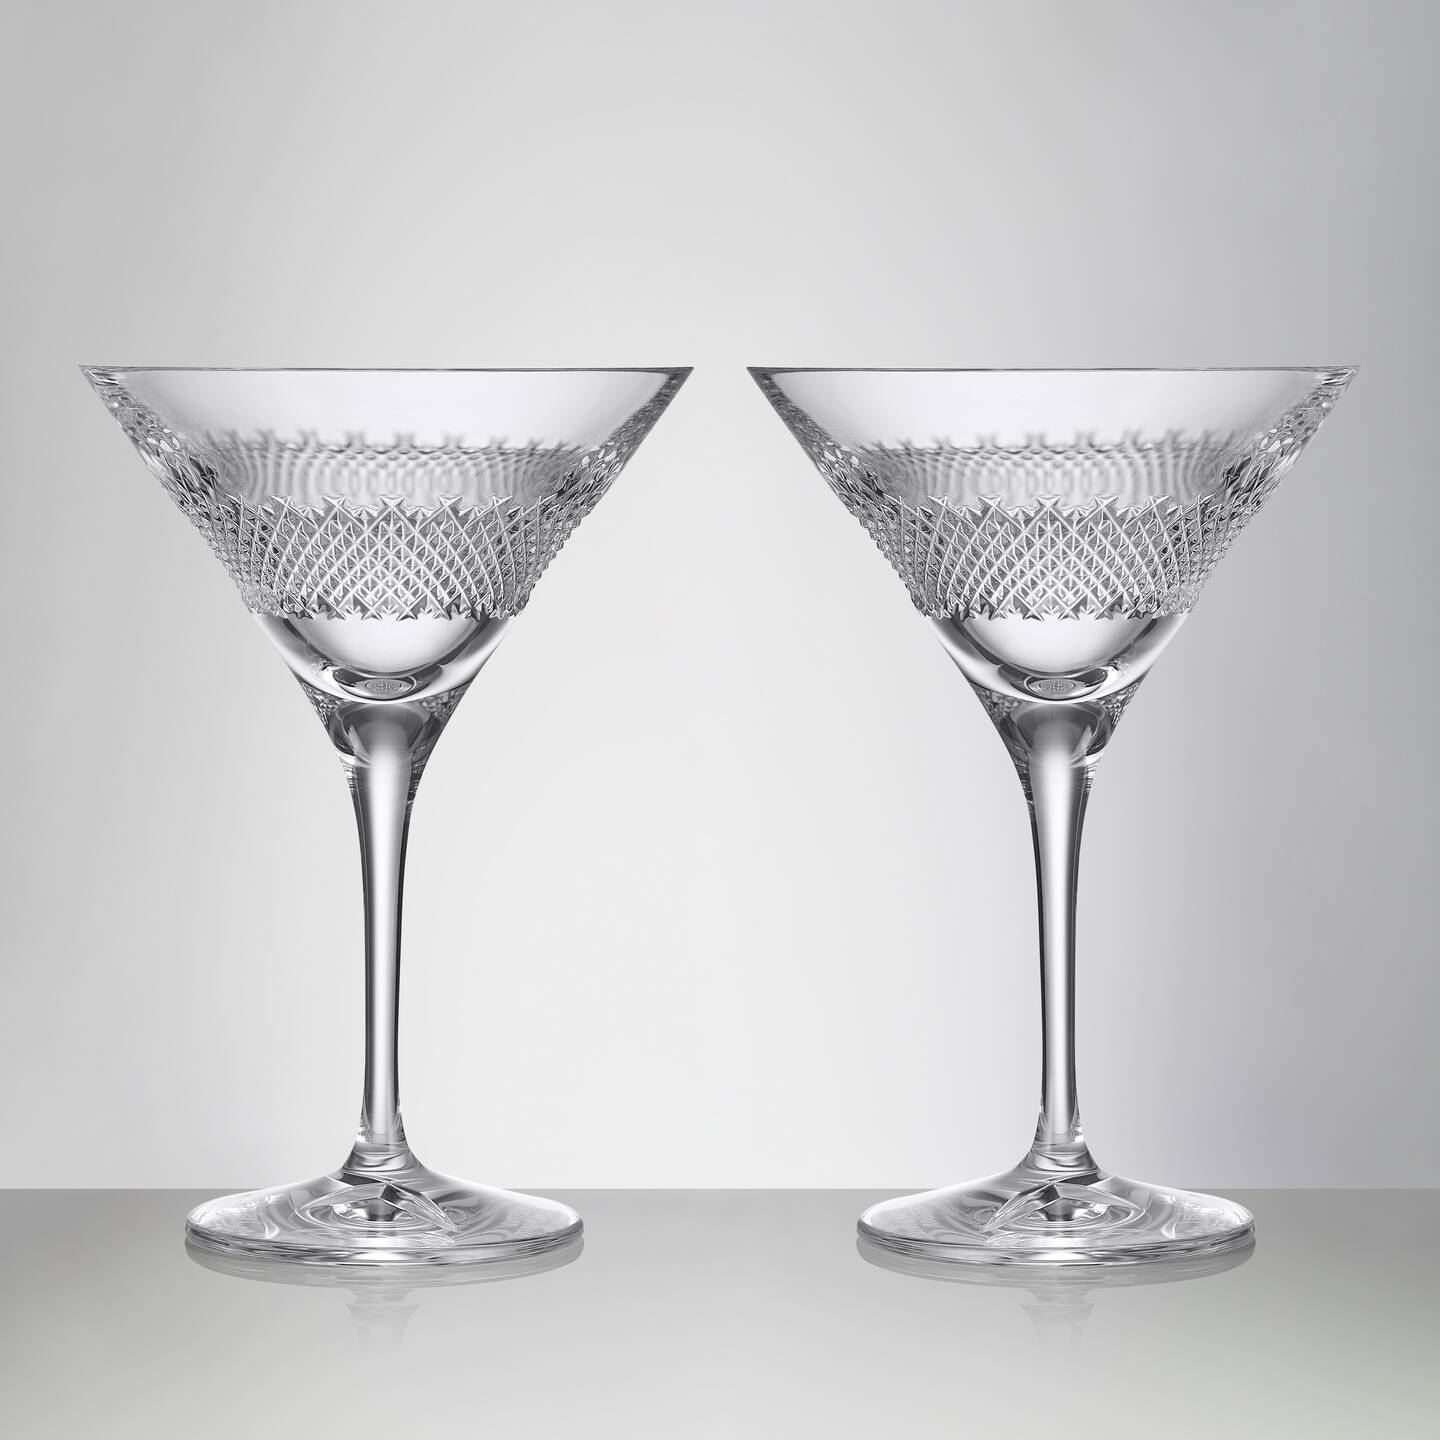 Luther Vandross Waterford Crystal Collection: Buy Glasses, Decanter